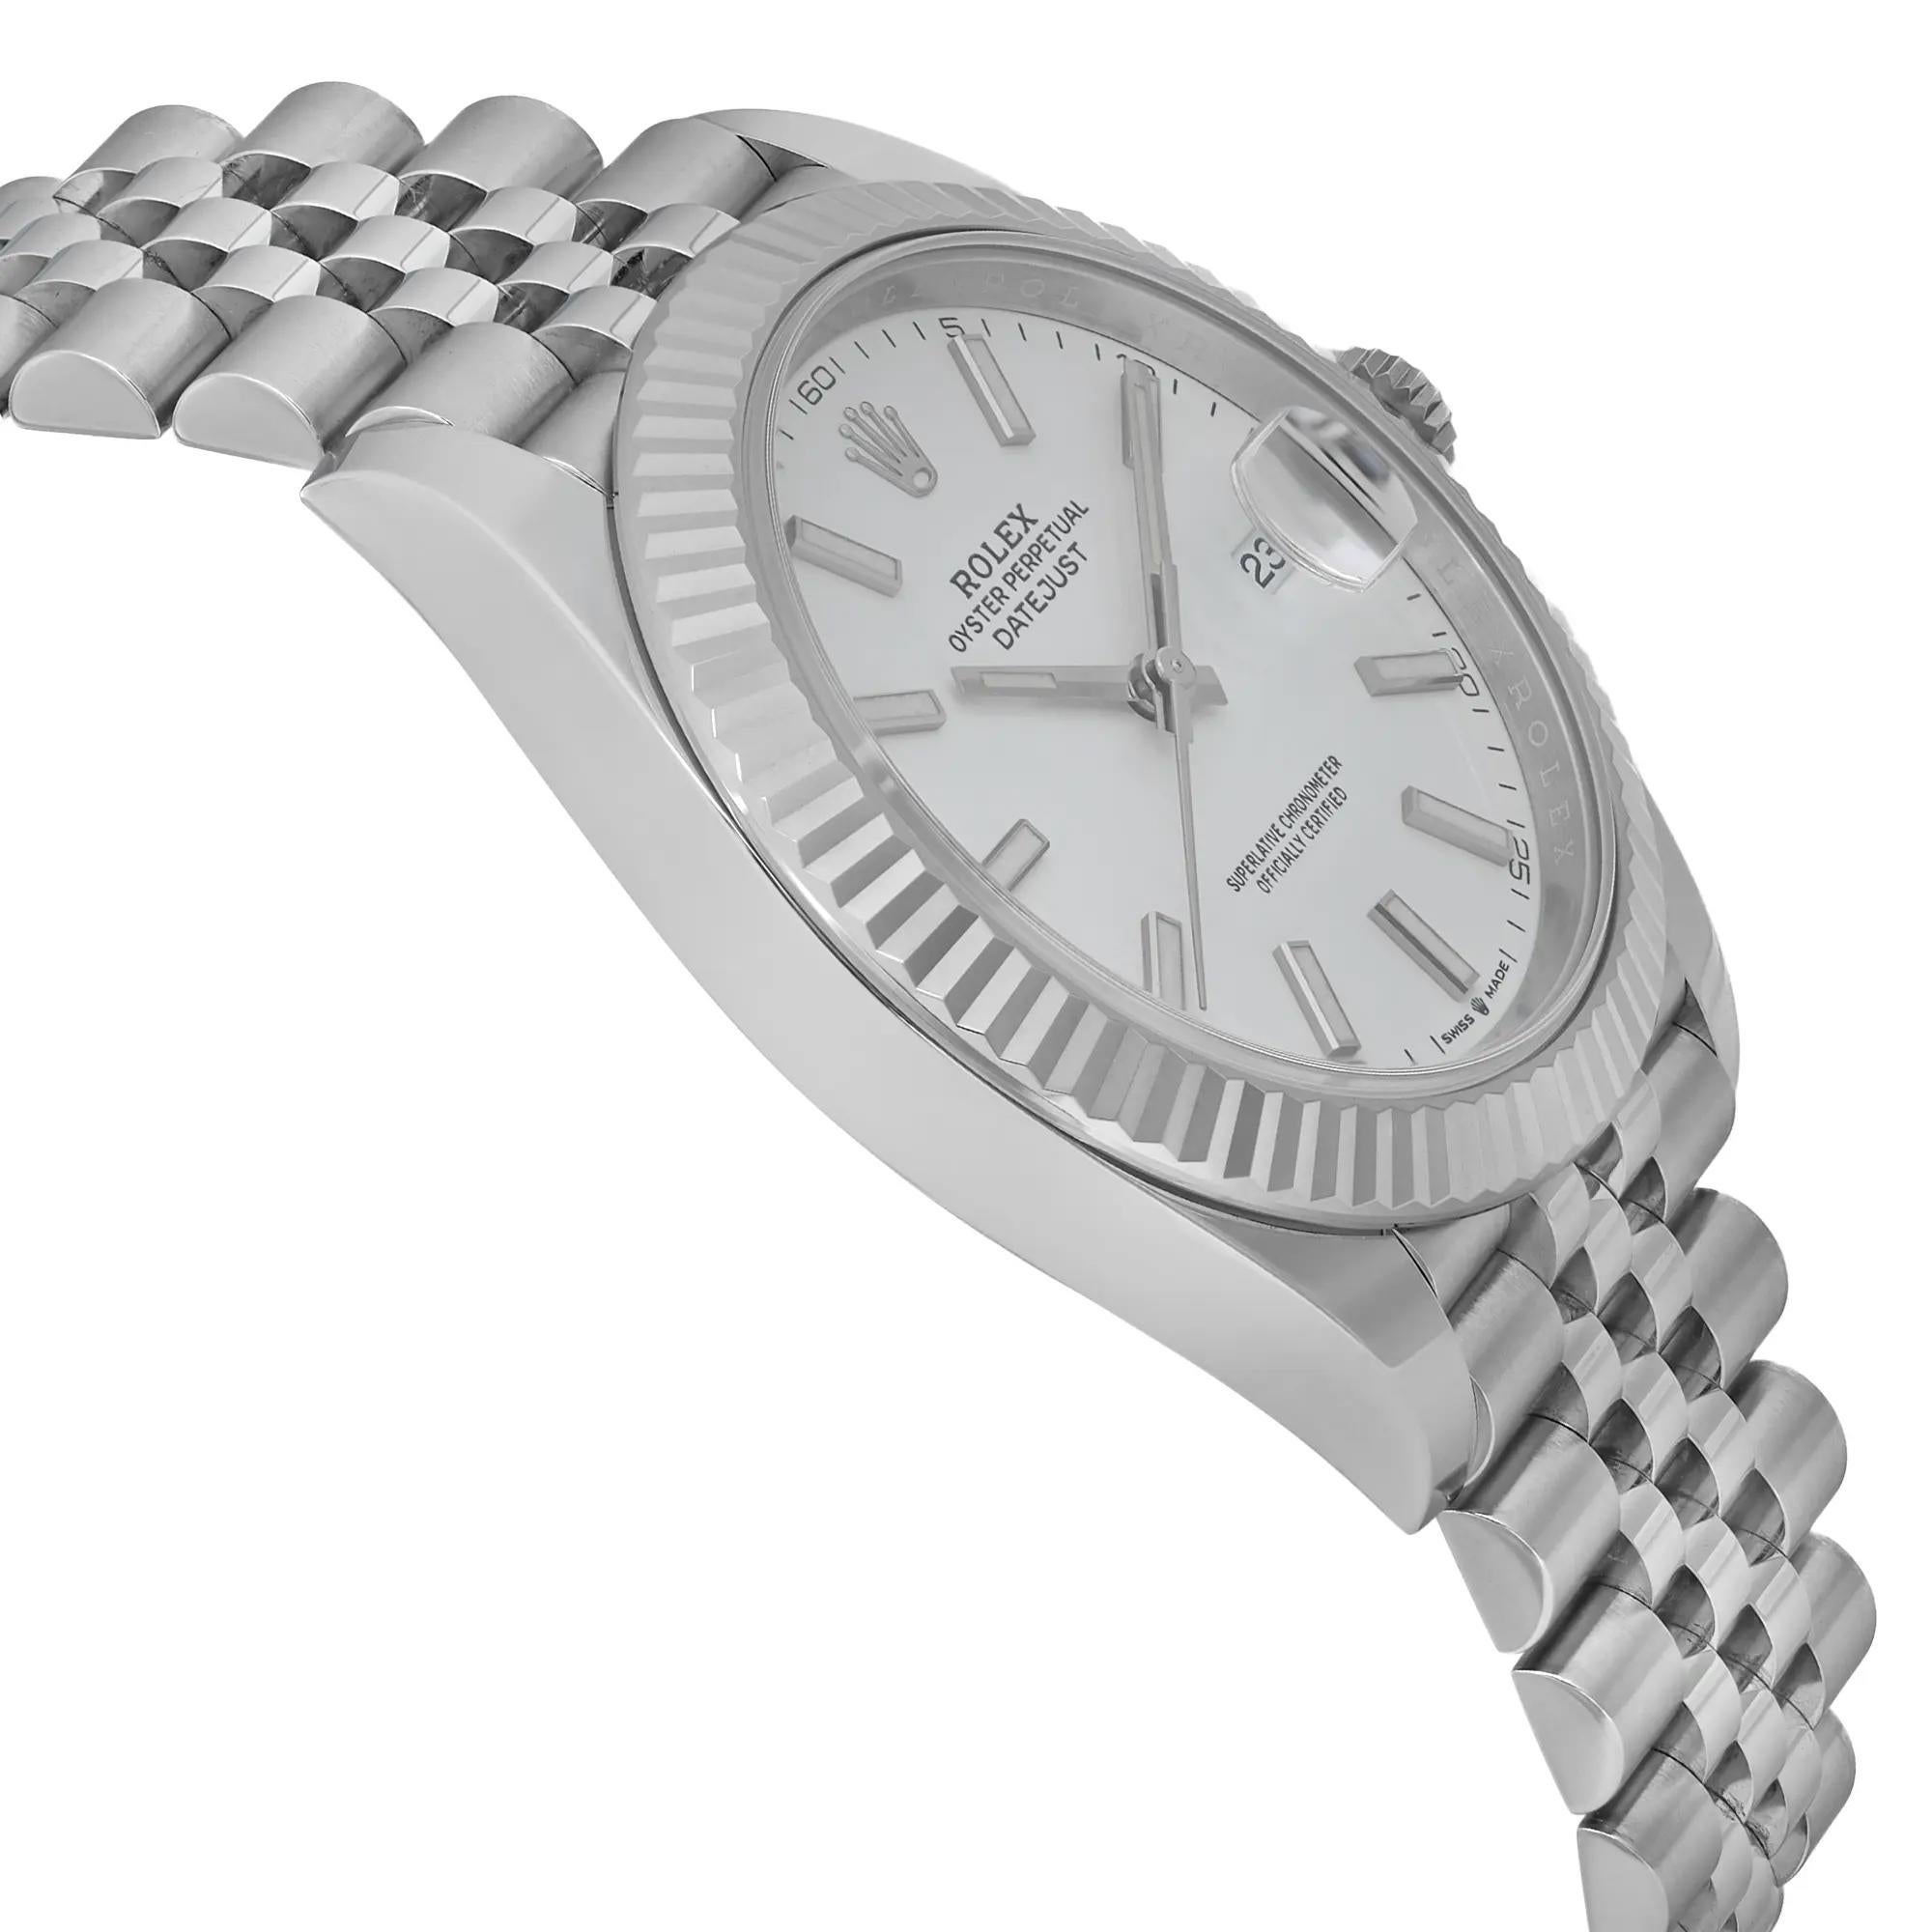 NEW Rolex Datejust 41 Steel 18K White Gold White Dial Men Automatic Watch 126334 For Sale 1